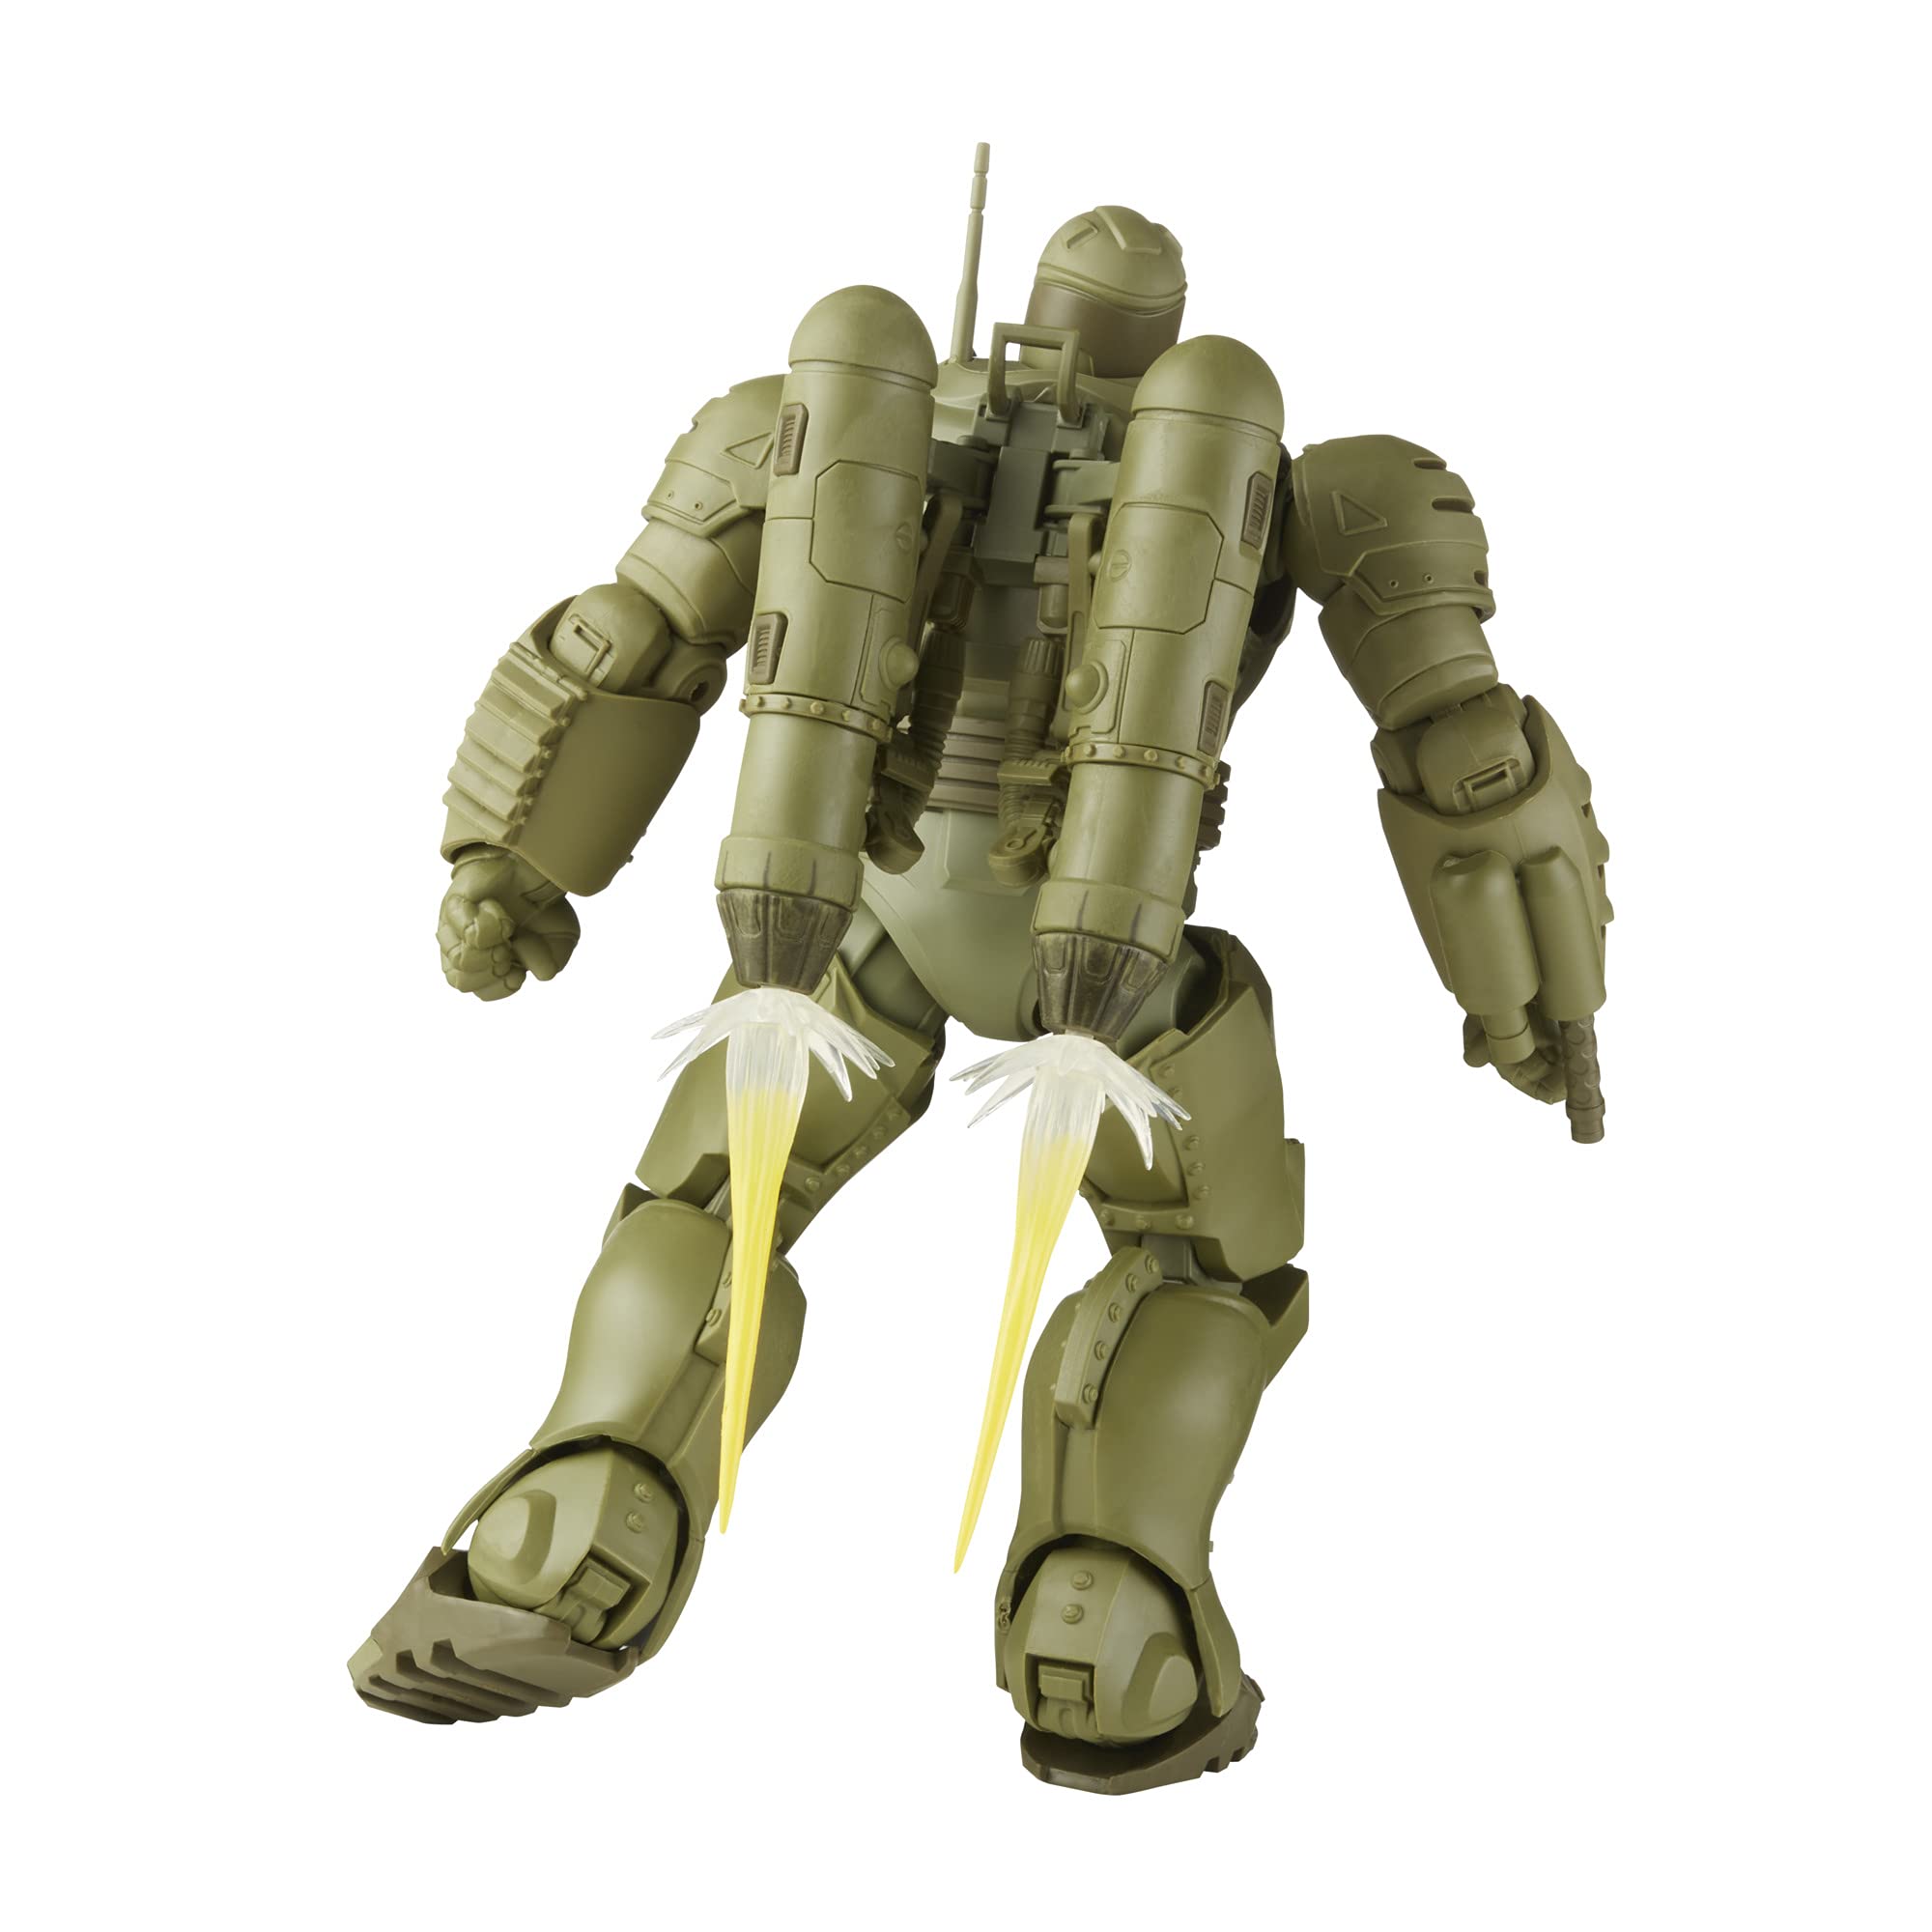 Marvel Legends Series 6-inch Scale Action Figure The Hydra Stomper Toy, Premium Design, 6-Inch Scale Figure, Backpack, 4 Accessories